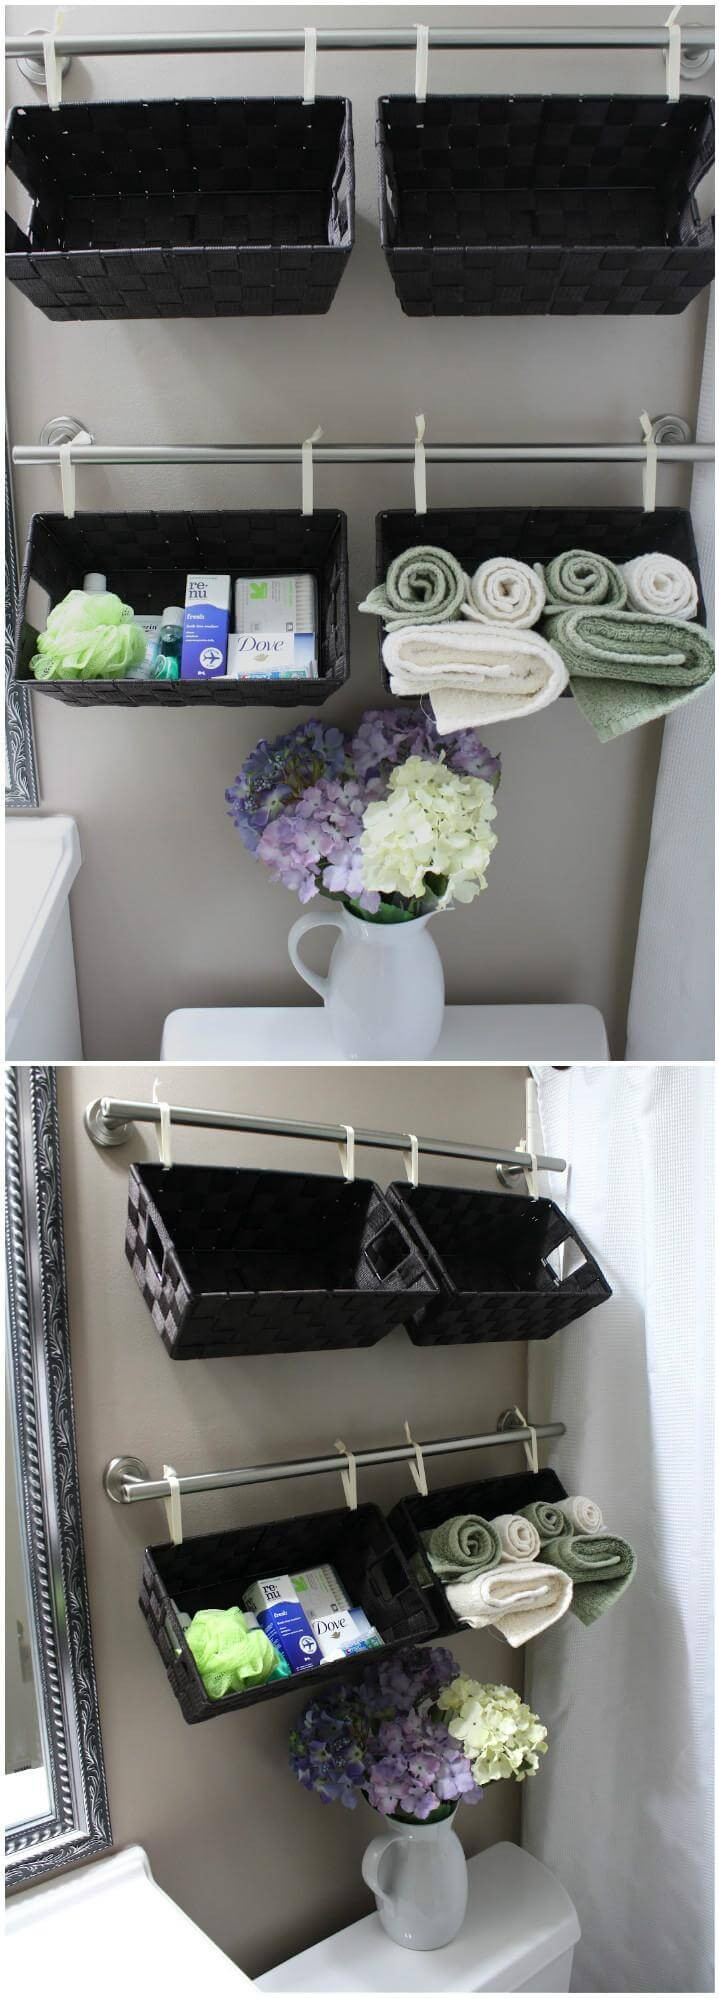 Hanging Baskets For Bathroom Storage
 50 DIY Bathroom Projects to Remodel Step by Step Page 5